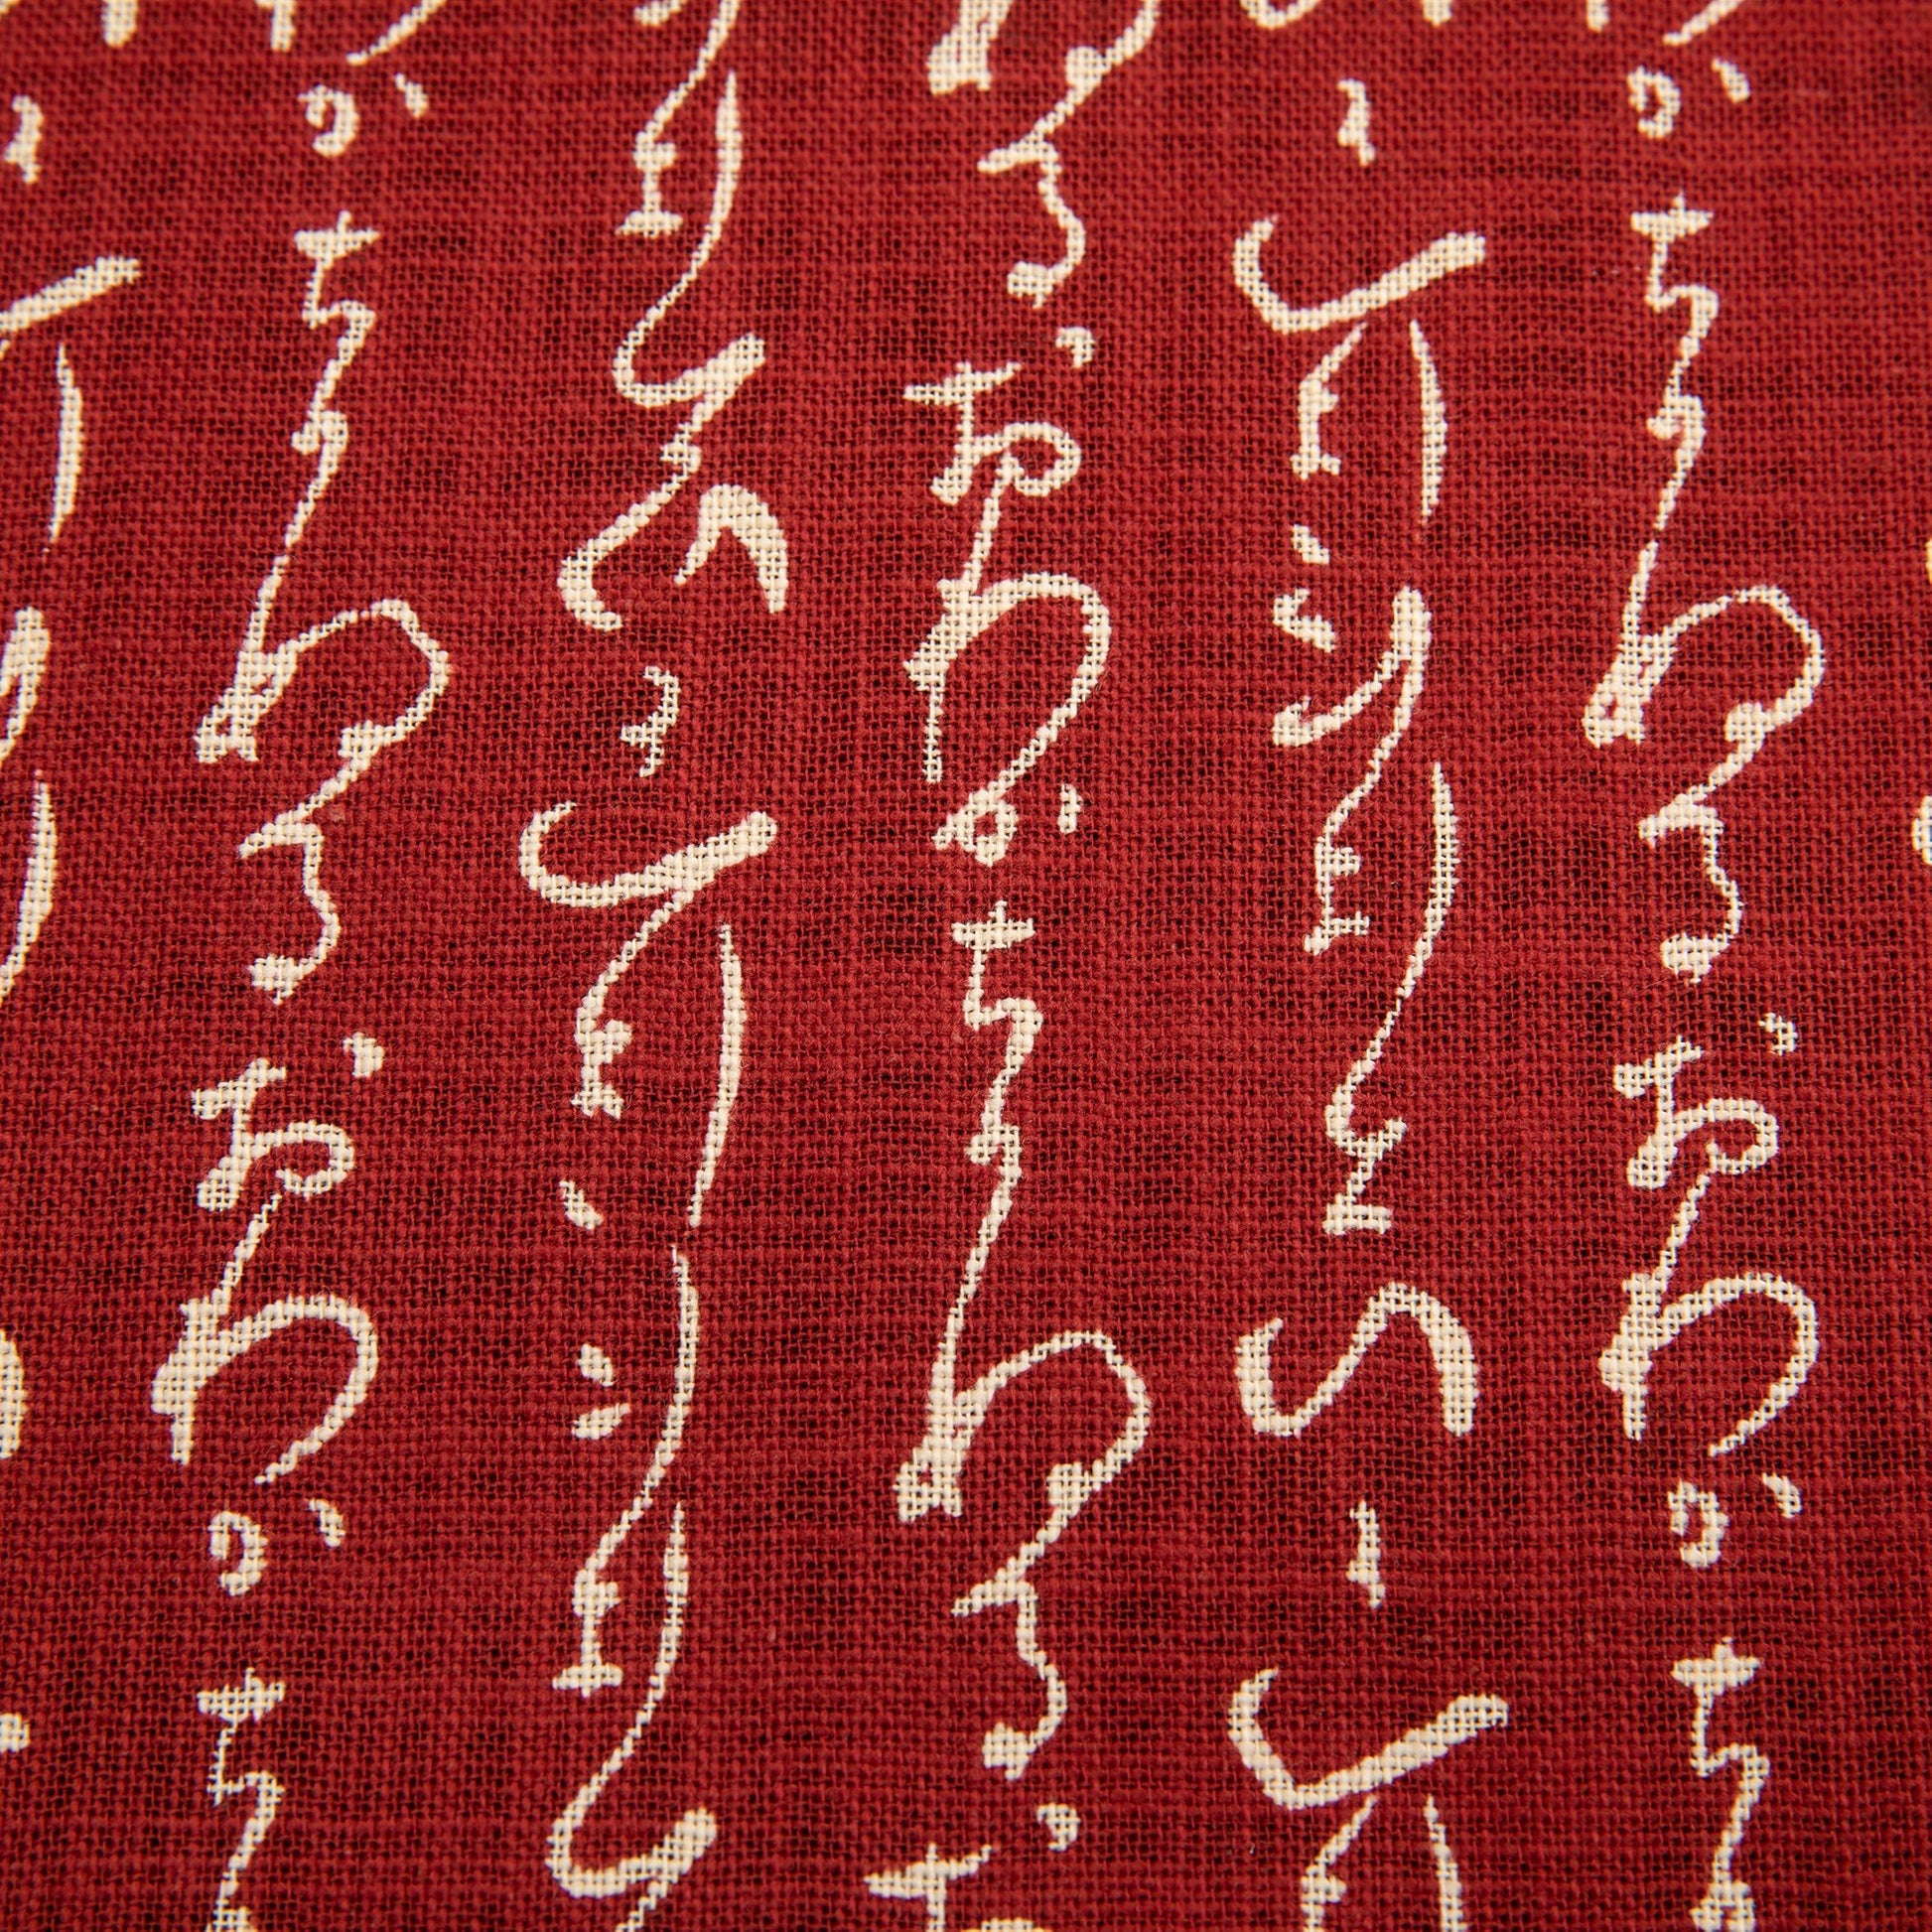 Imported Japanese Fabric - Kanji Red_Fabric_Imported from Japan_100% Cotton_Japanese Sleep System